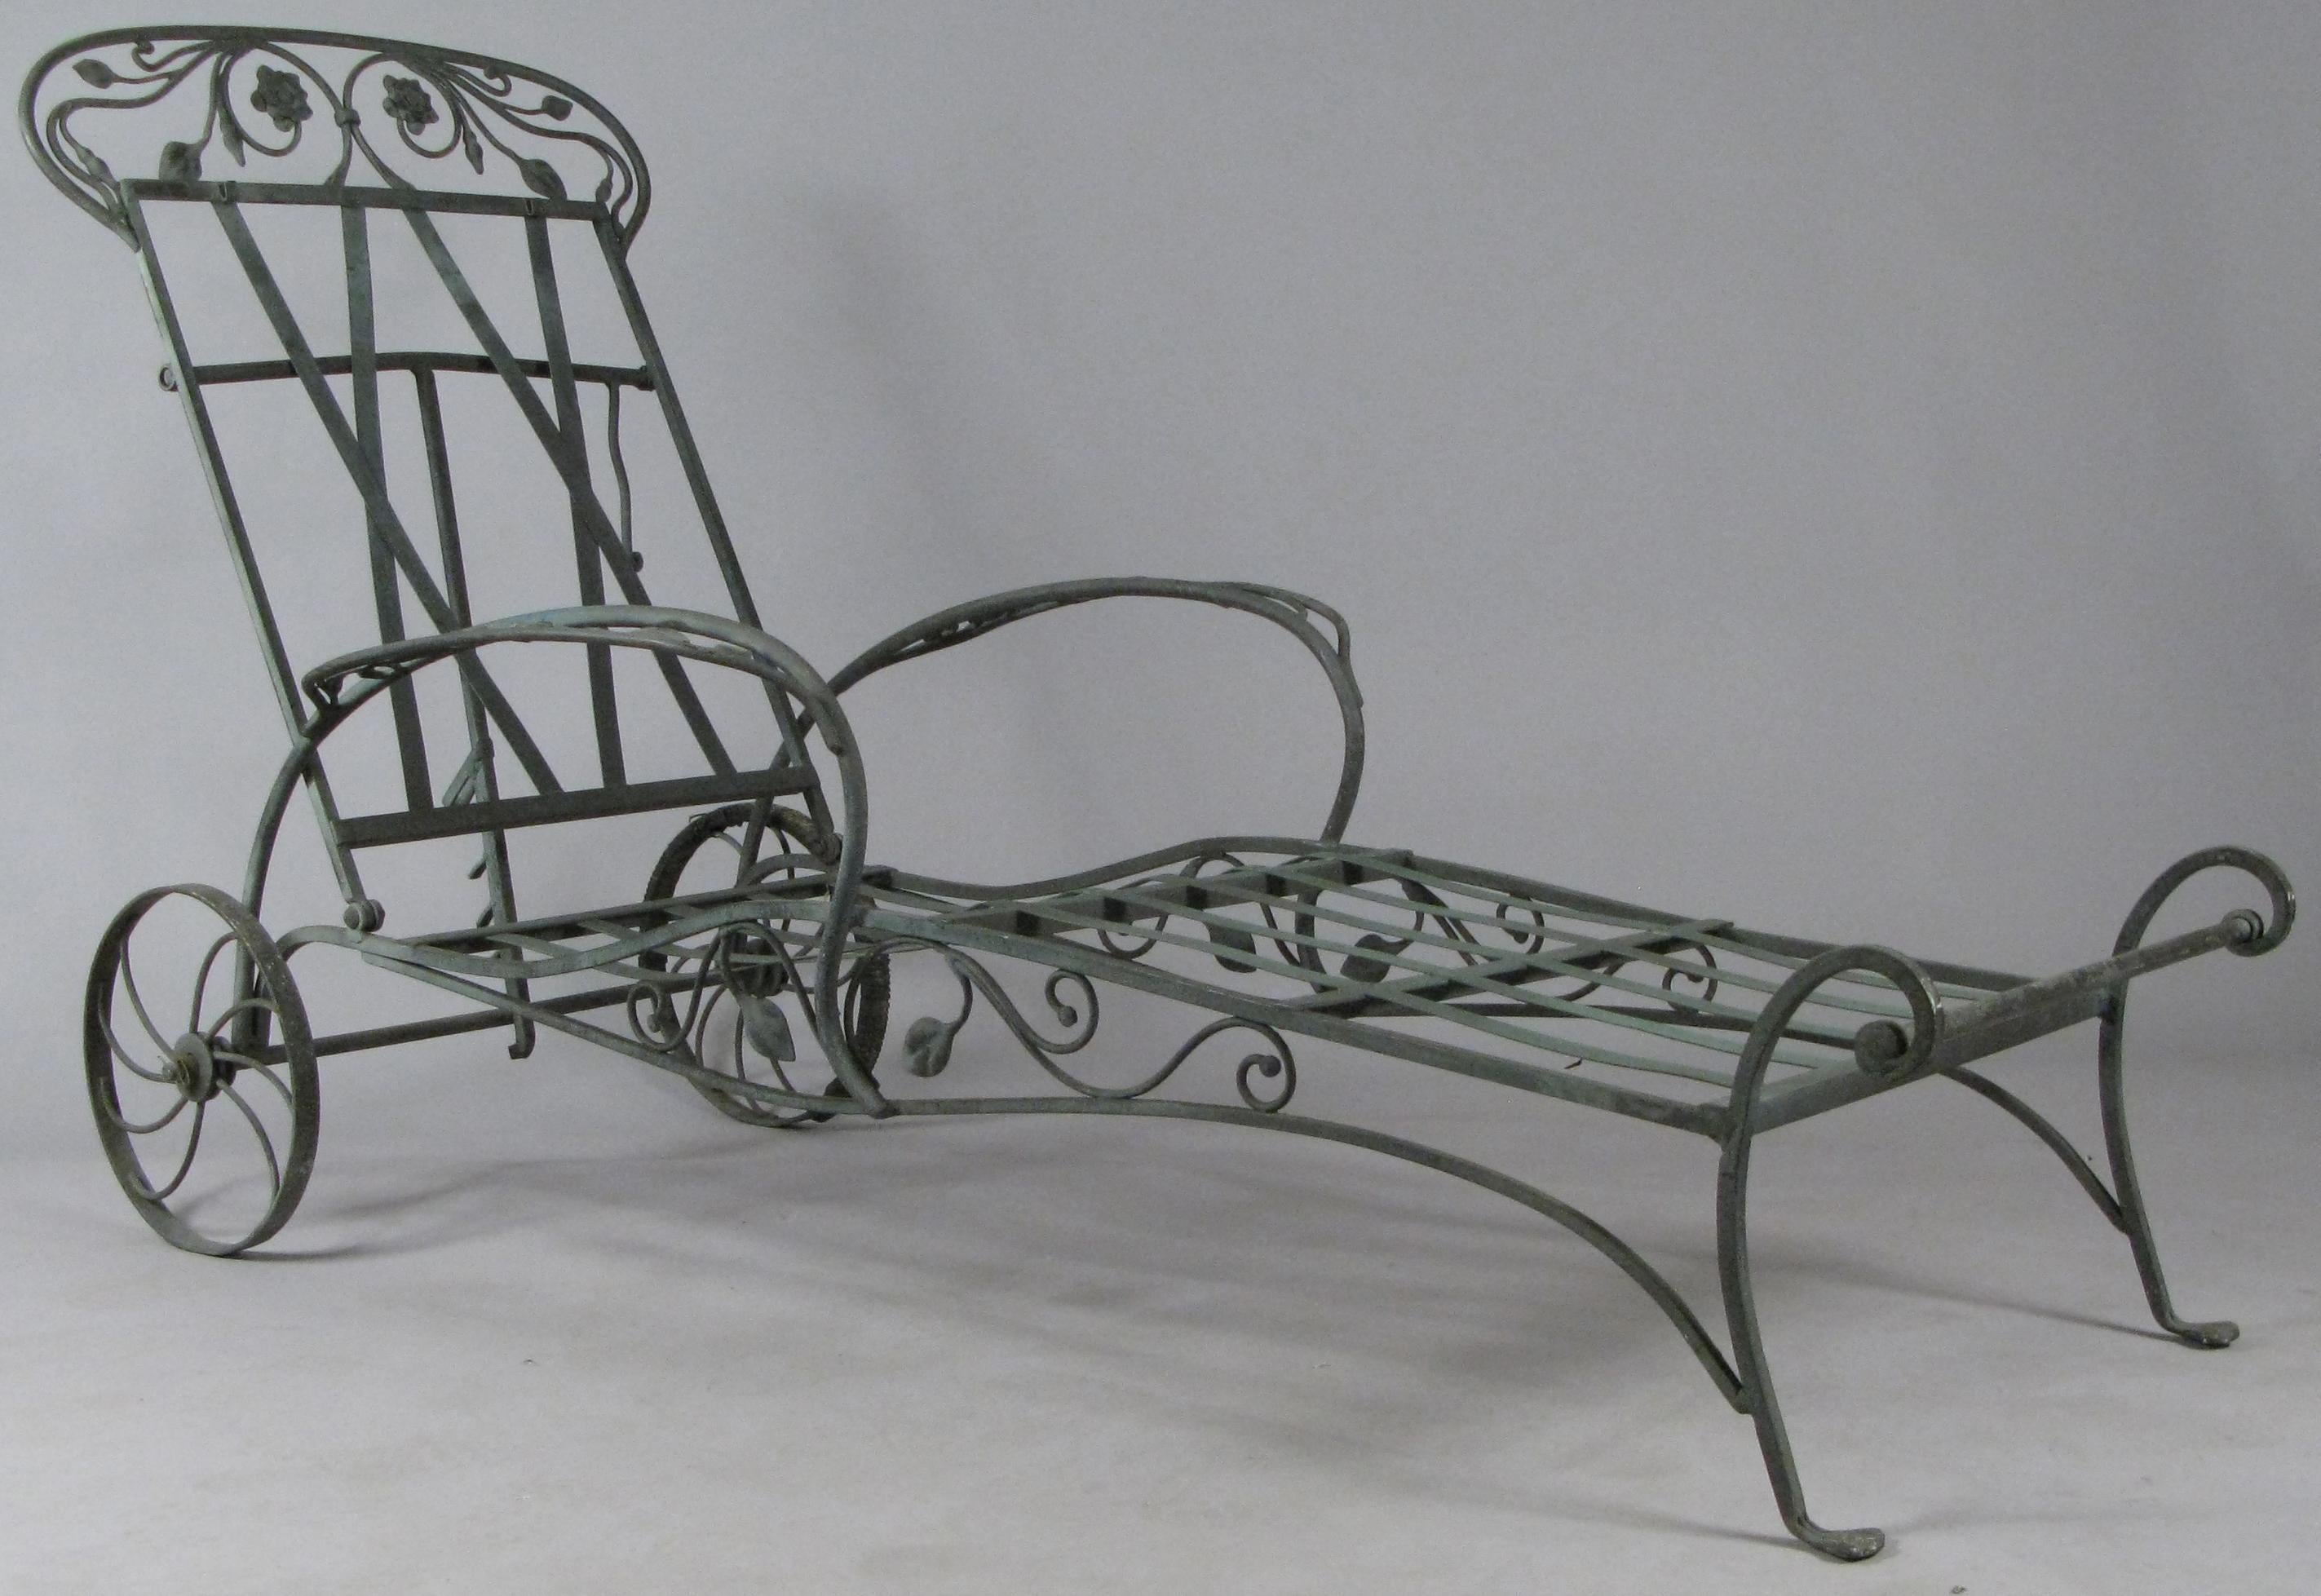 A very well made pair of wrought iron adjustable chaise lounges, made by Salterini, circa 1950, in their blooming rose pattern. Beautifully designed and made, with vine and flower details under the skirt and above the back, and with lovely scrolled